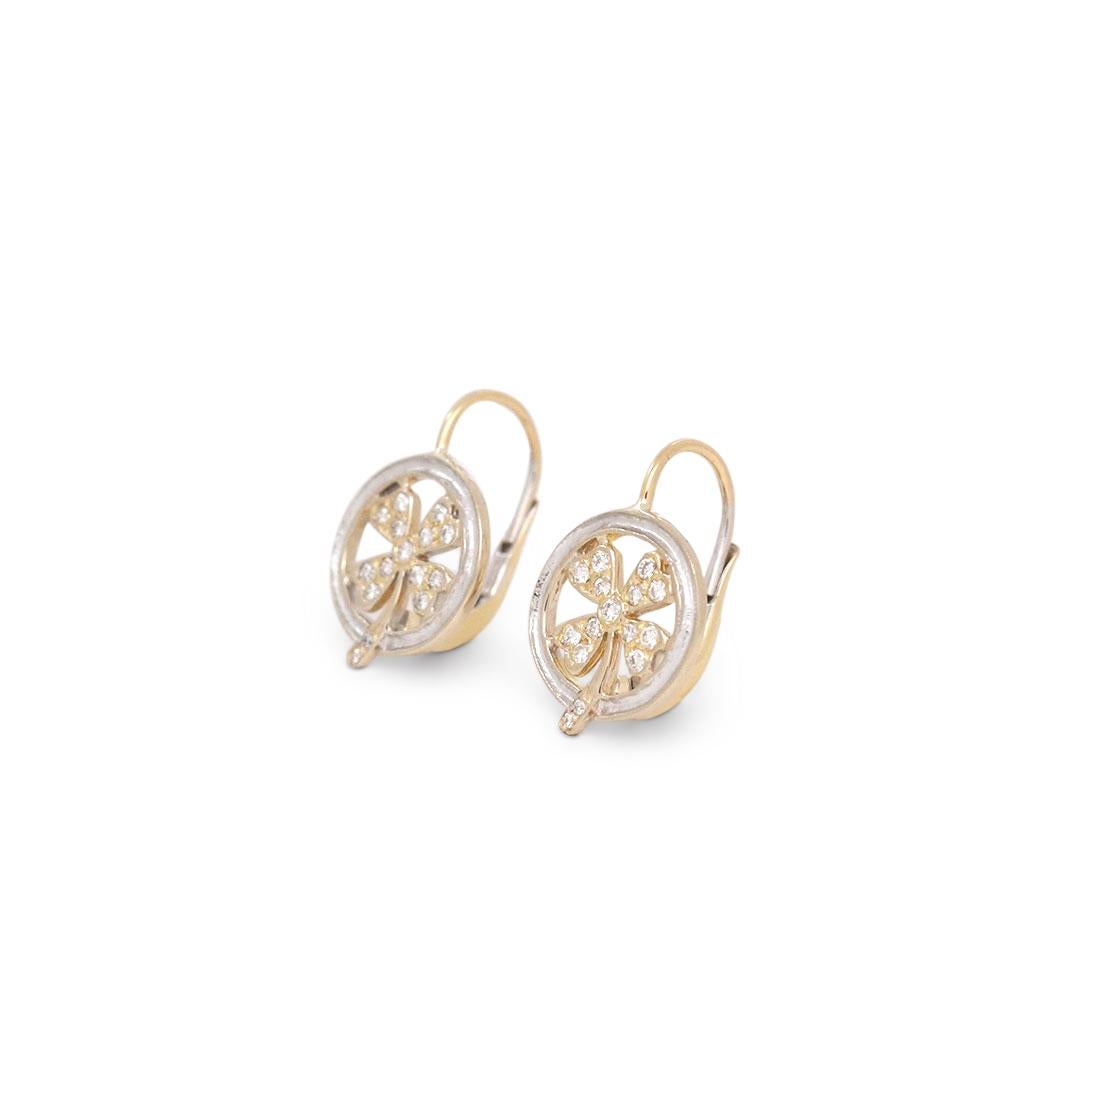 Authentic Cathy Waterman earrings crafted in platinum and 22 karat yellow gold. Each earring features a platinum bezel that encircles a yellow gold four-leaf clover set with round brilliant cut diamonds of an estimated .30 carat total weight. Signed